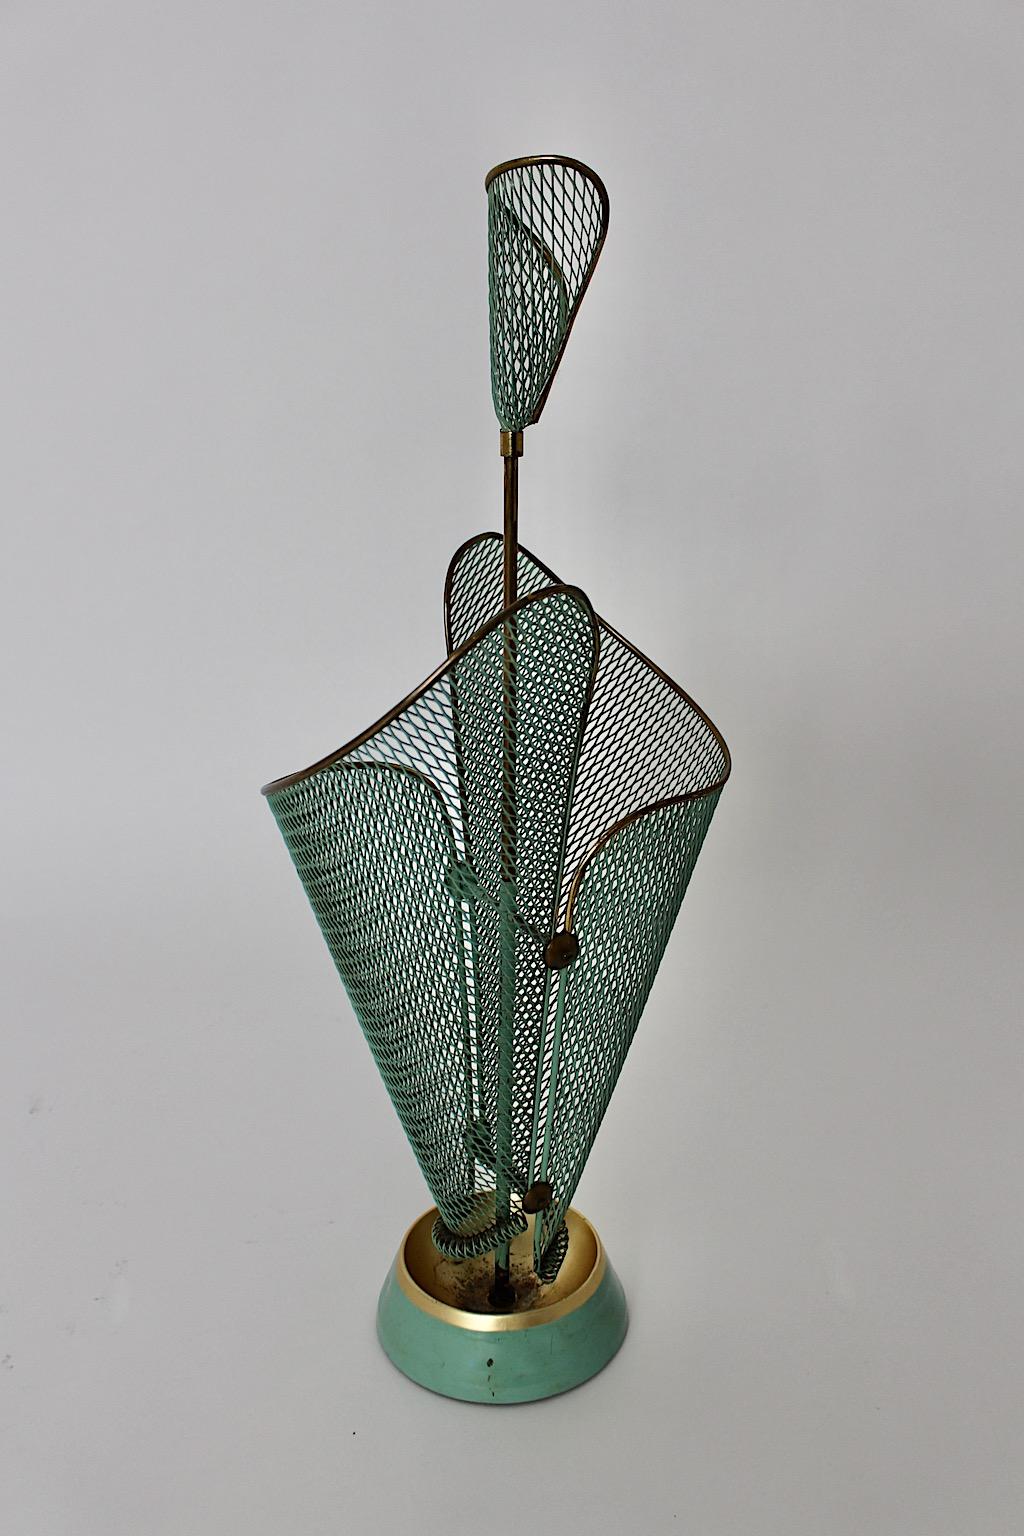 Mid-Century Modern vintage umbrella Stand from metal in teal green color tone by Schiwa Luxus 1950s Germany.
A stunning umbrella Stand from metal mesh in teal green and brass details with a cast iron base and an integrated drip cup.
The perforated